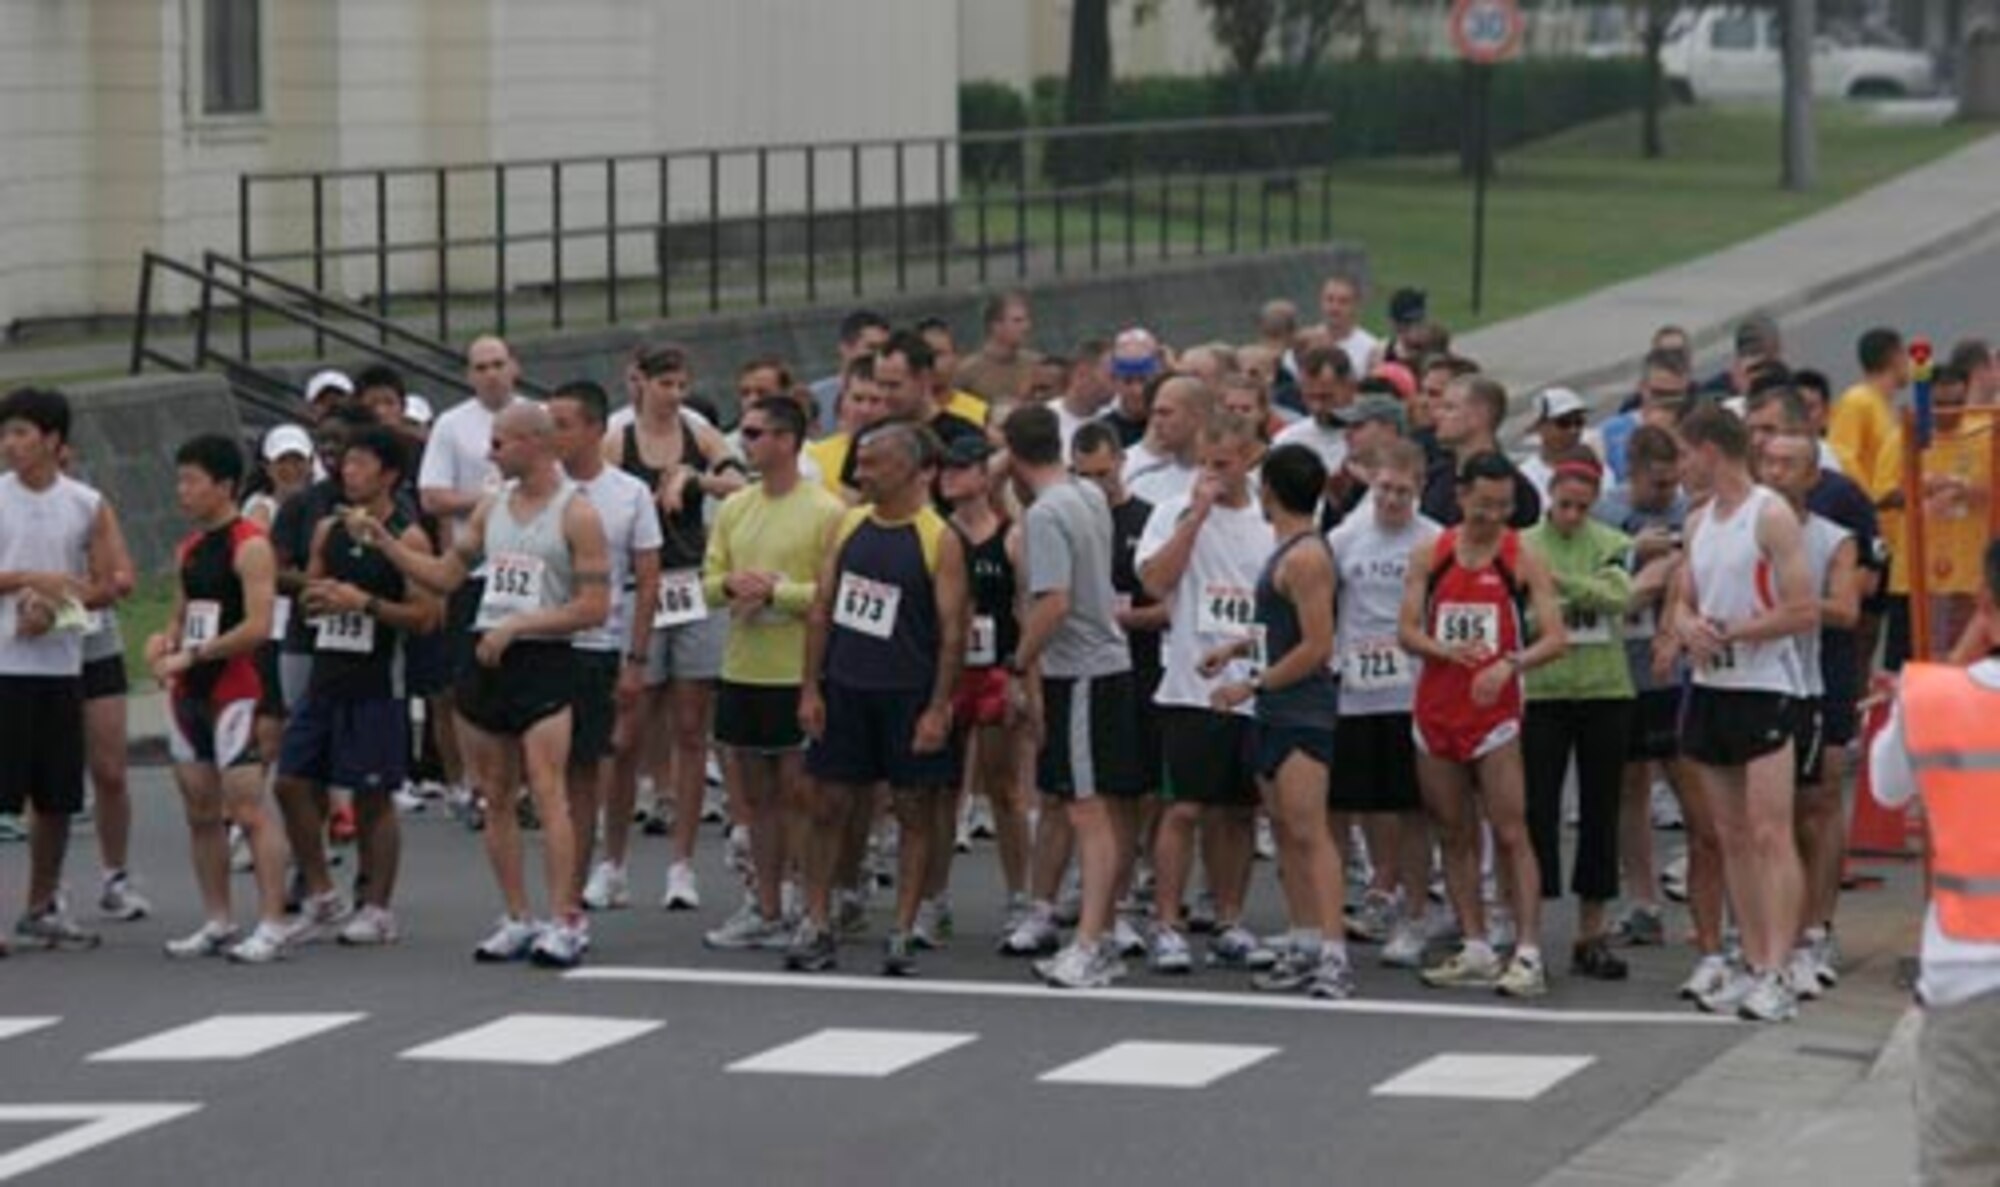 MISAWA AIR BASE, Japan -- More than 80 people line up for the start of the 1st annual "Race the Base" perimeter run Sept. 15. With a start time of 8 a.m., there was no time limit set to run the 8.5 mile course. (U.S. Air Force photo)